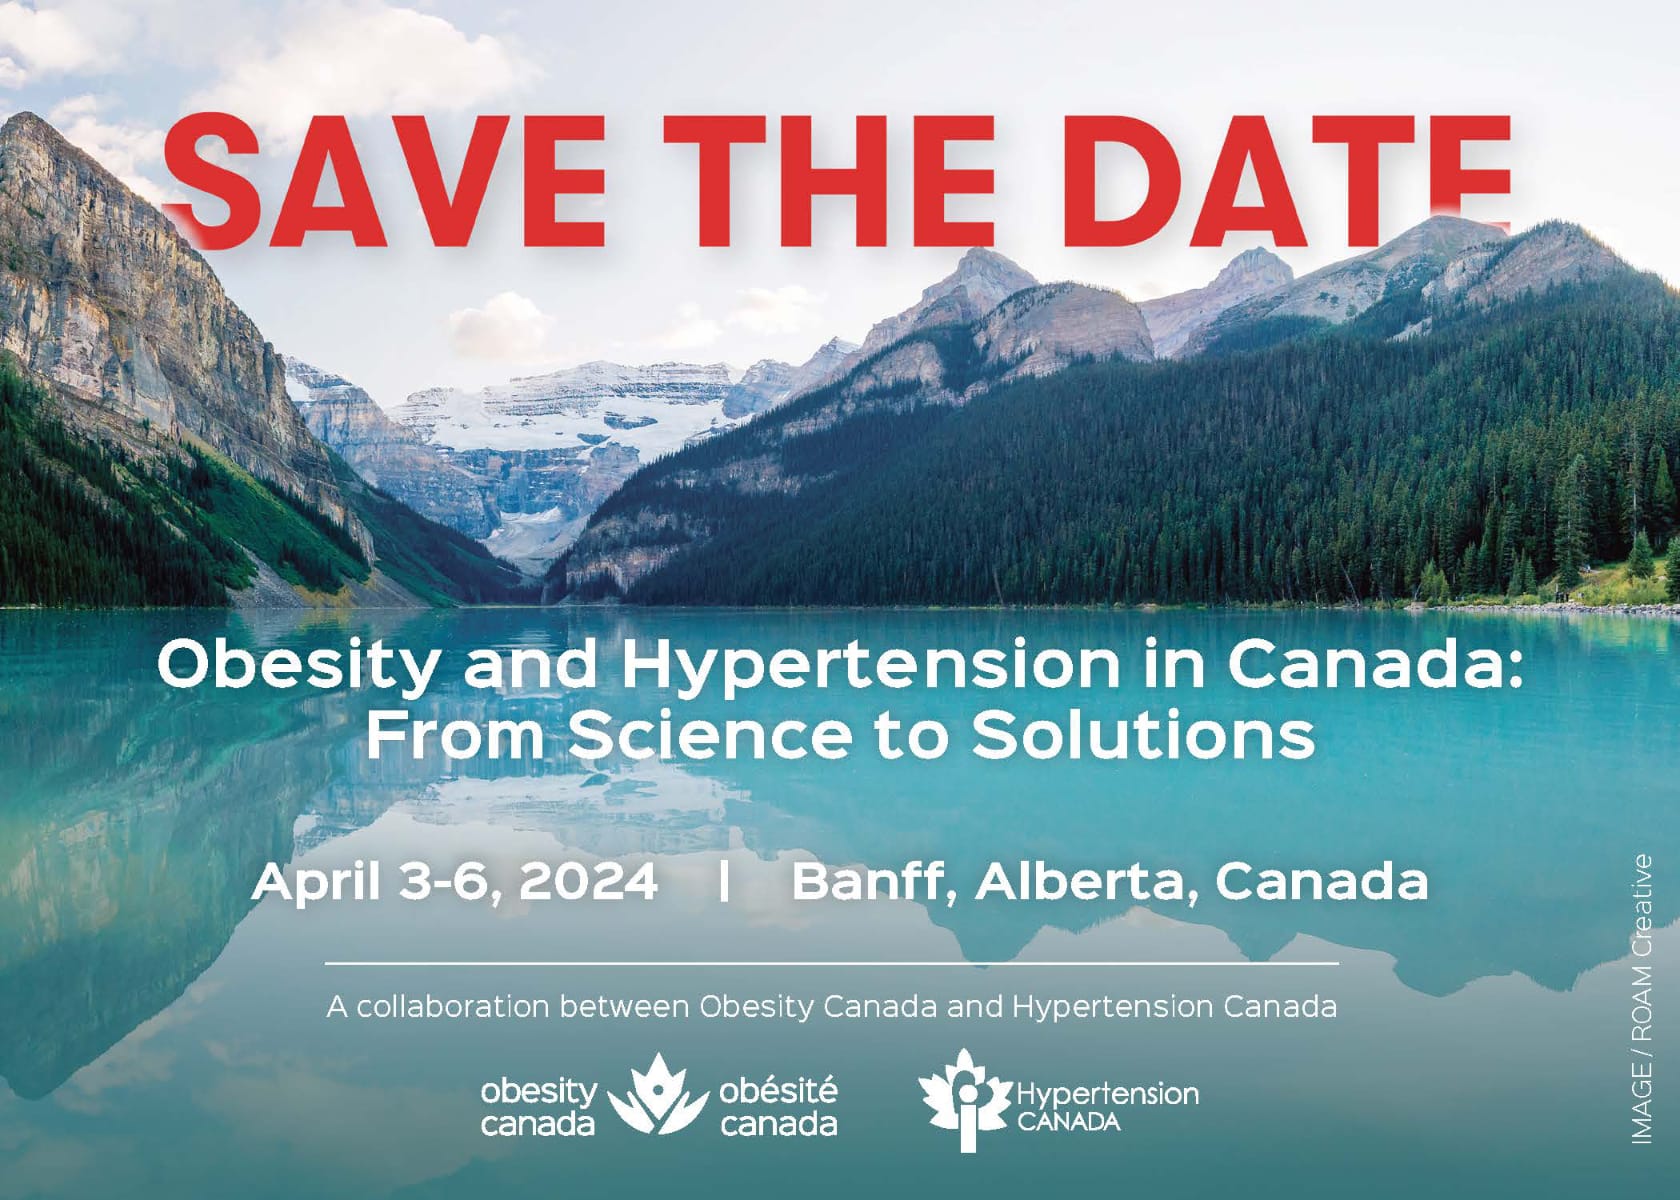 Obesity and Hypertension in Canada: From Science to Solutions April 3-6, 2024 Banff, Alberta, Canada